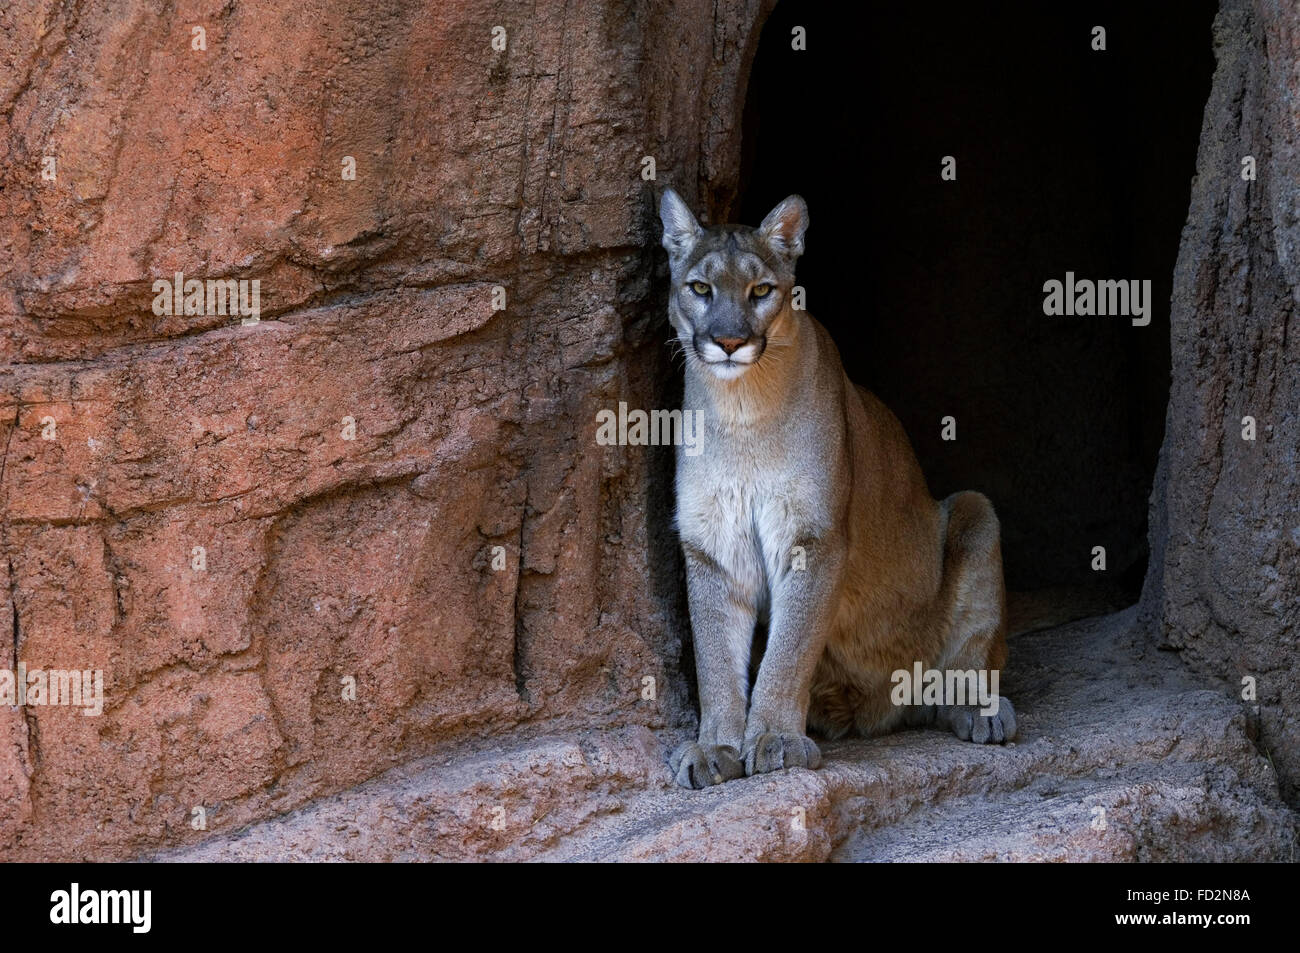 Puma / mountain lion / cougar (Felis concolor) sitting in the shade at entrance of cave, native to the Americas Stock Photo